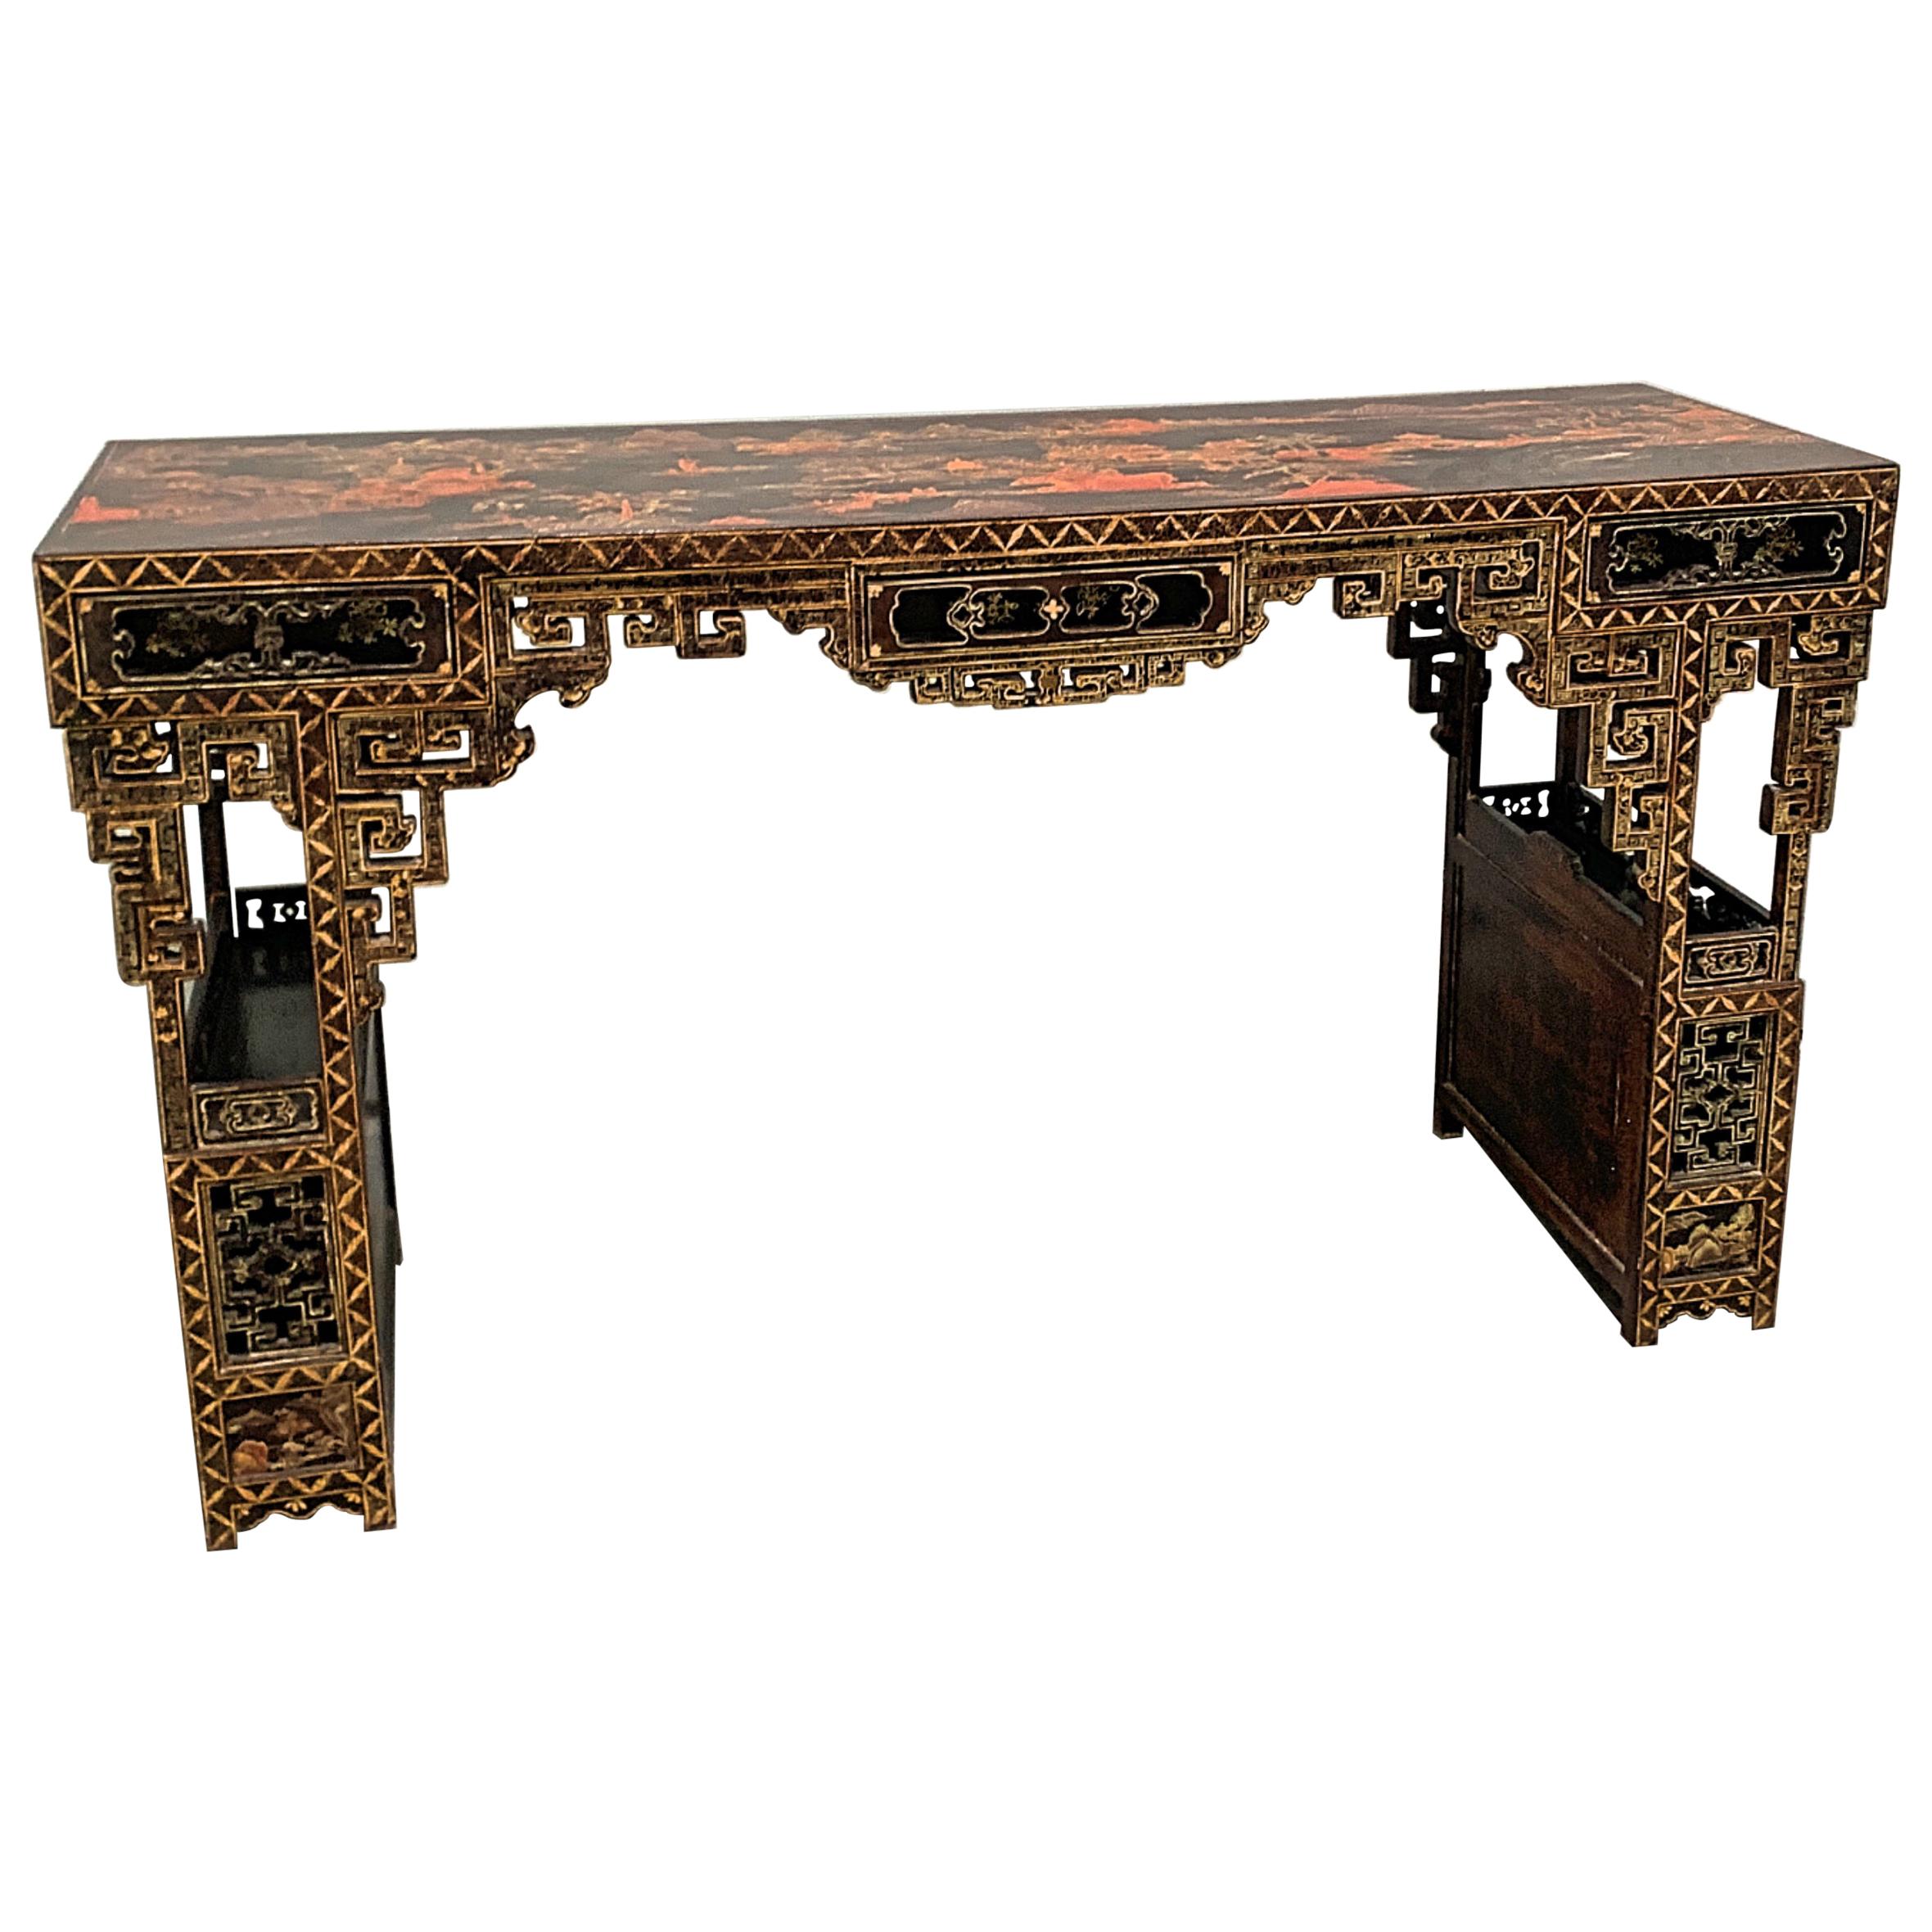 Chinese Black Lacquer and Gilt Painted Console, Qing Dynasty, 19th Century